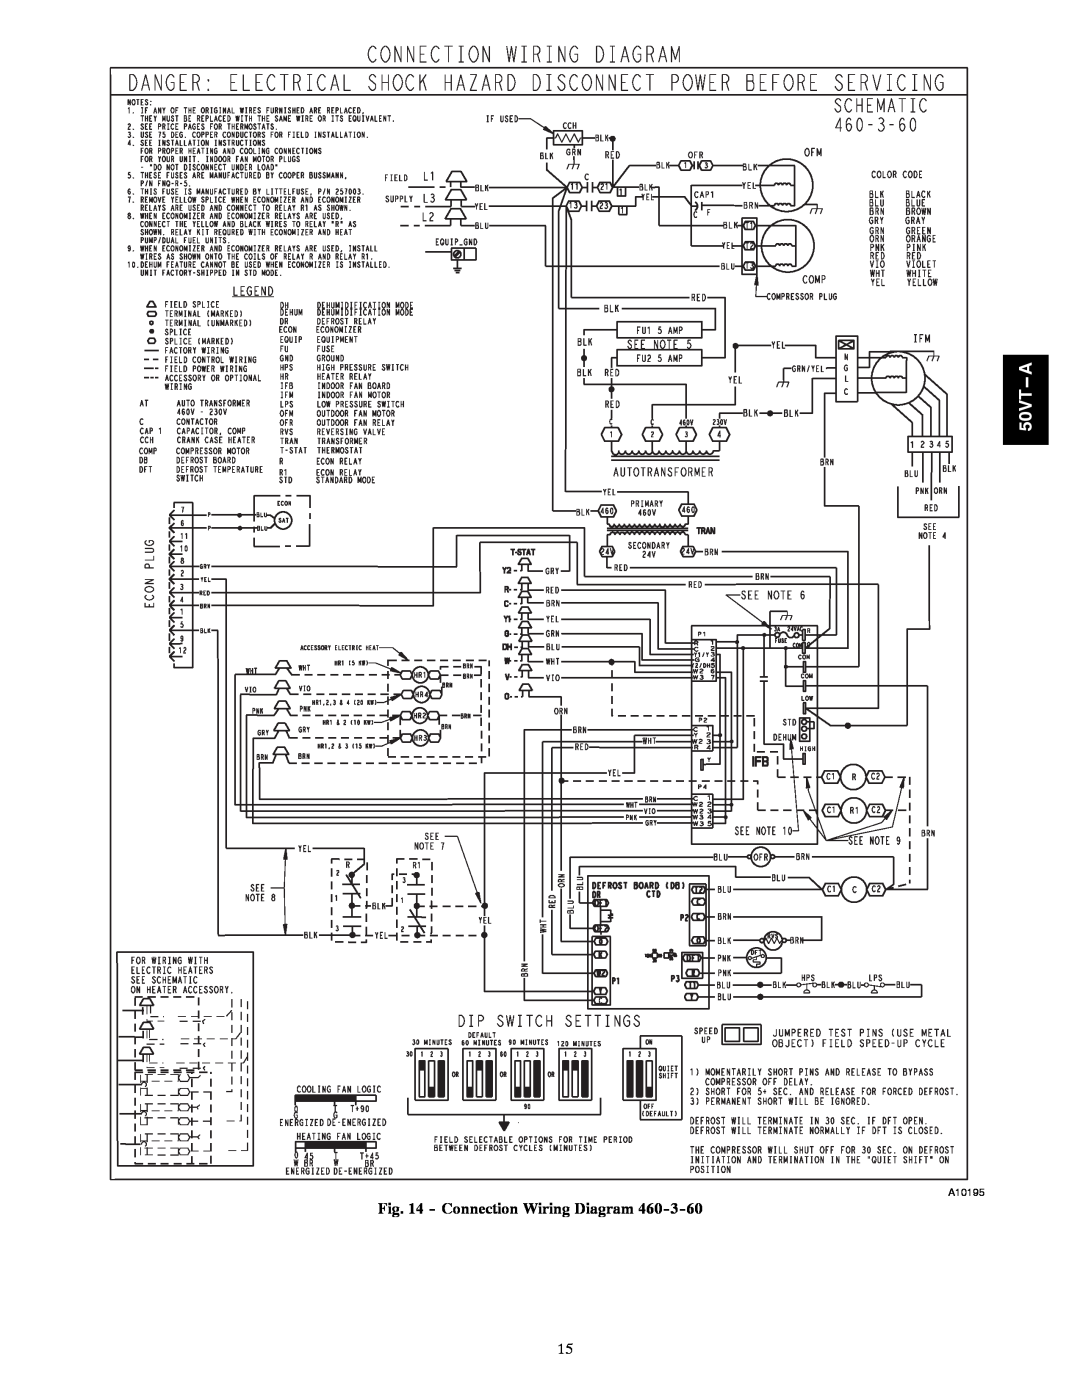 Carrier 50VT-A installation instructions Connection Wiring Diagram, 50VT--A, A10195 